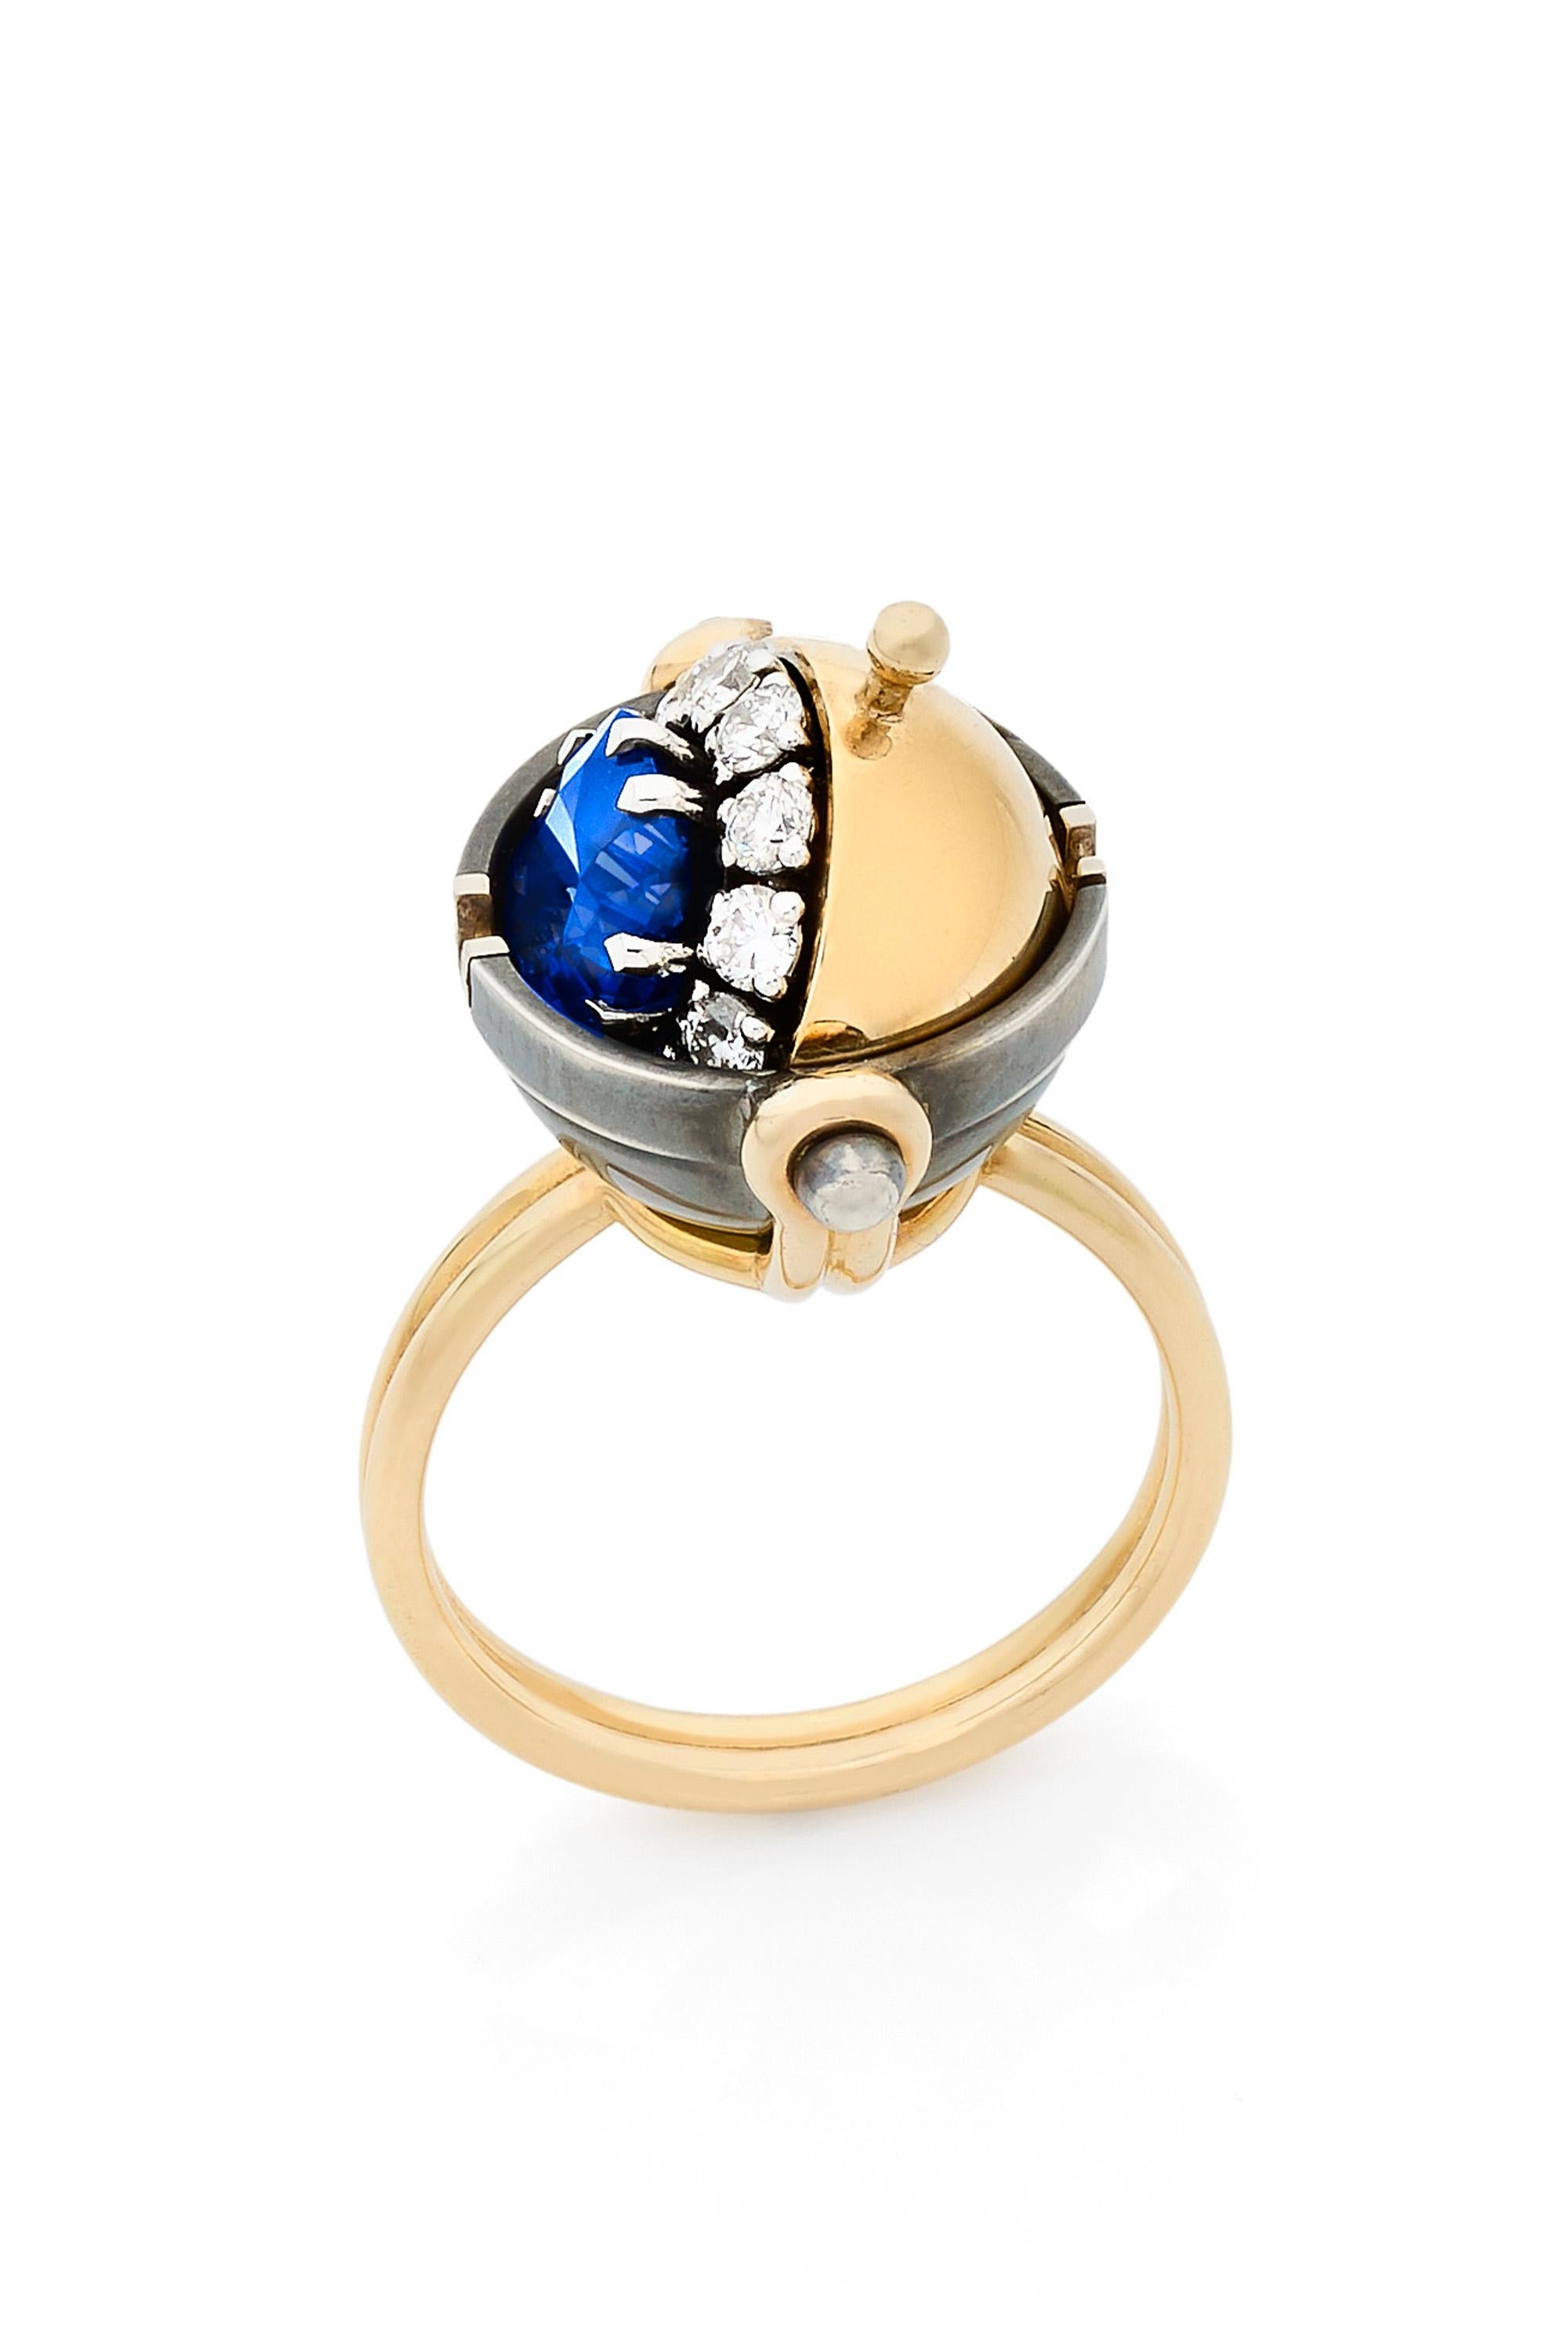 Gold and distressed silver ring. Rotating sphere set with a star diamond revealing a cushion-cut sapphire surrounded by diamonds.

Details:
Sapphire : 2.15 cts, 7x7
12 Diamonds : 0.4 cts
18k Yellow Gold : 9 g
Distressed Silver :  3g 
Made in France